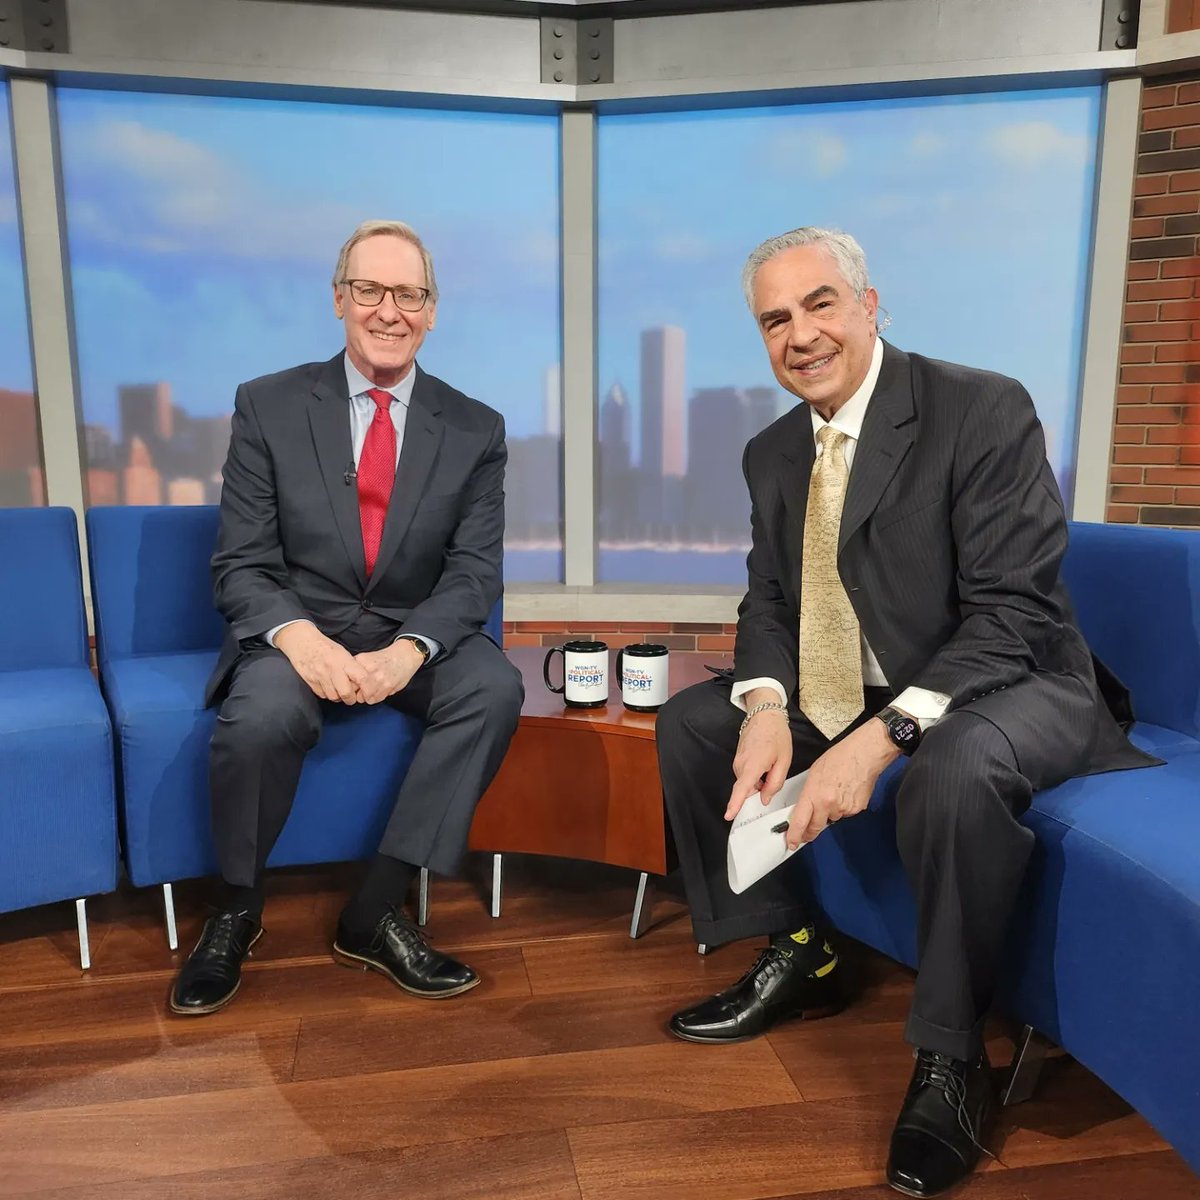 Sunday morning, 9am on WGN-TV Political Report: Alderman Jason Ervin talks about the migrant crisis and police community relations and Democratic strategist Richard Gordon discusses the upcoming presidential race tune in on Channel 9 or the live stream: wgntv.com/live